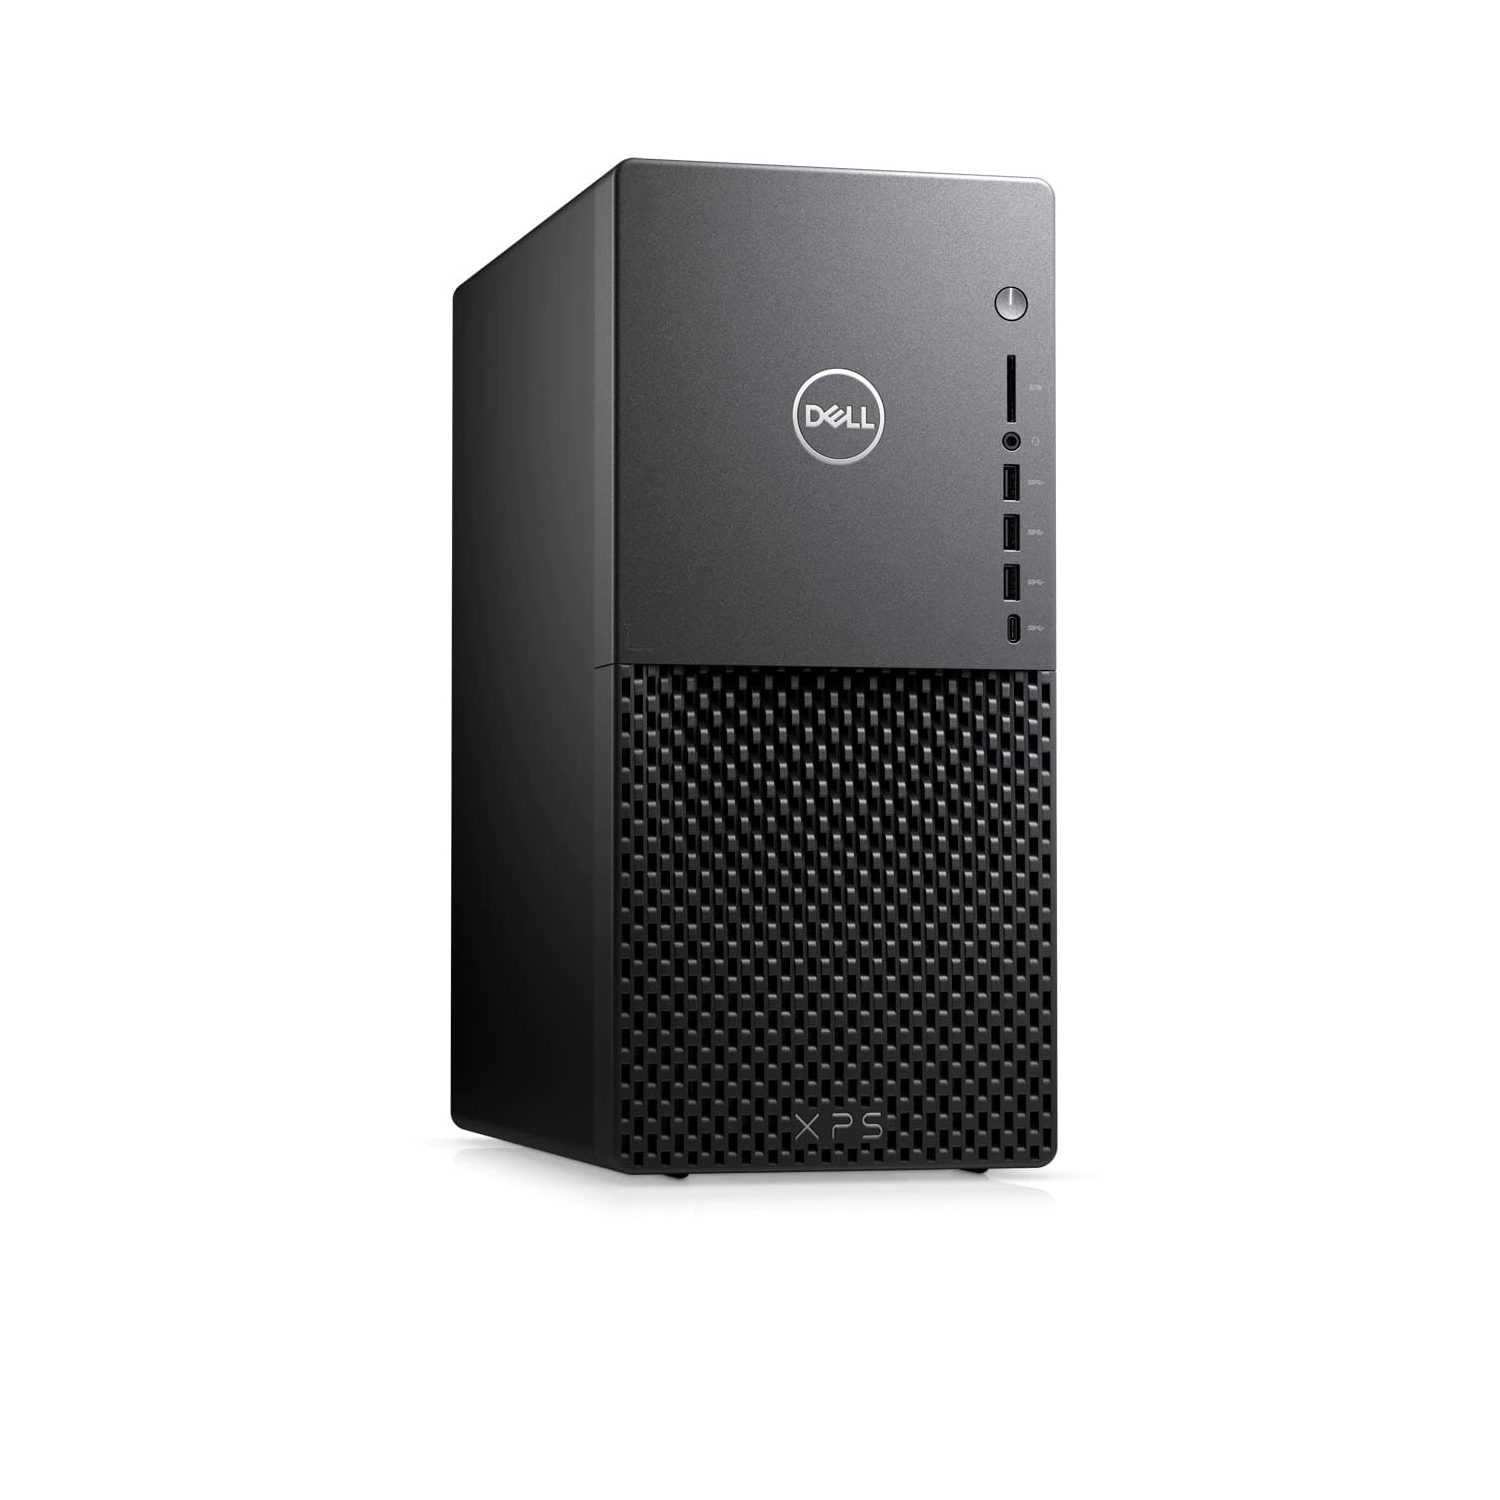 Refurbished (Excellent) - Dell XPS 8940 Desktop (2020) | Core i9 - 2TB SSD + 2TB HDD - 64GB RAM - RTX 3060 | 8 Cores @ 5.3 GHz - 11th Gen CPU Certified Refurbished